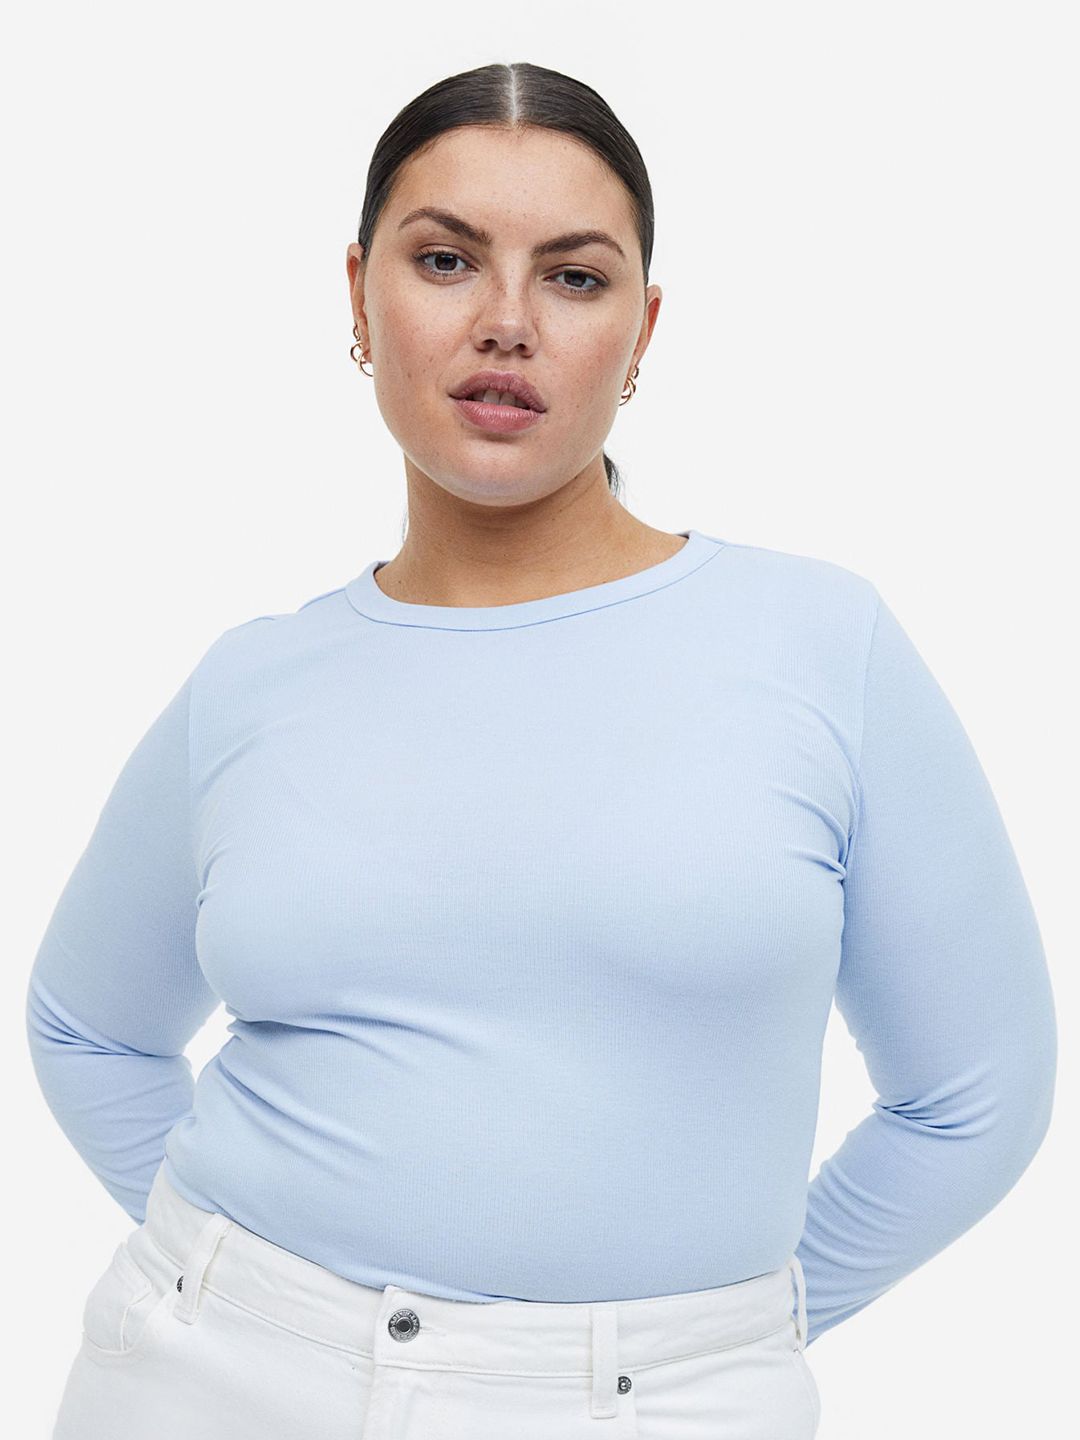 H&M Women Plus Size Ribbed Modal-Blend Top Price in India